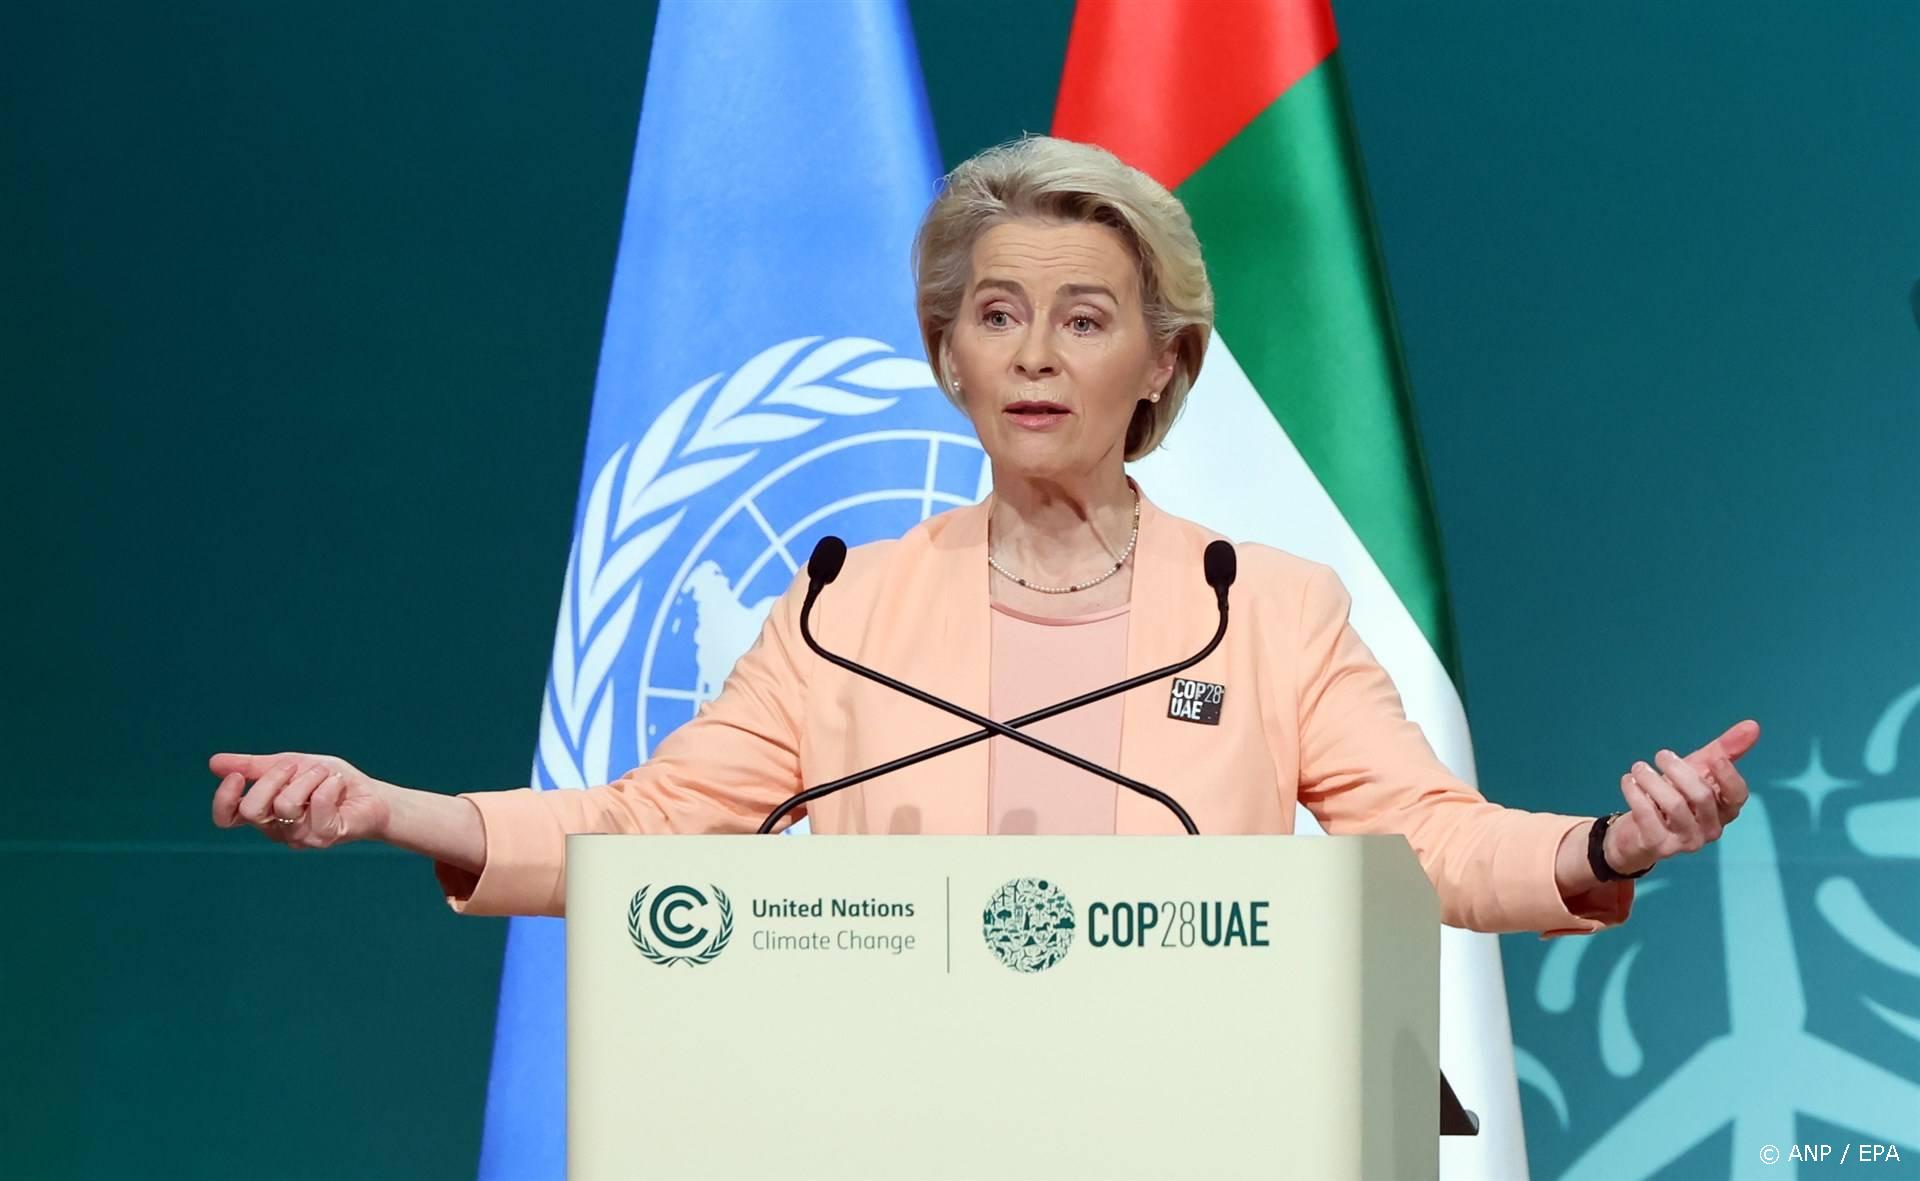 epa11005459 Ursula von der Leyen, President of the European Commission, speaks during the UN Climate Change Conference COP28, in Dubai, United Arab Emirates, 01 December 2023. The 2023 United Nations Climate Change Conference (COP28), runs from 30 November to 12 December, and is expected to host one of the largest number of participants in the annual global climate conference as over 70,000 estimated attendees, including the member states of the UN Framework Convention on Climate Change (UNFCCC), business leaders, young people, climate scientists, Indigenous Peoples and other relevant stakeholders will attend.  EPA/ALI HAIDER